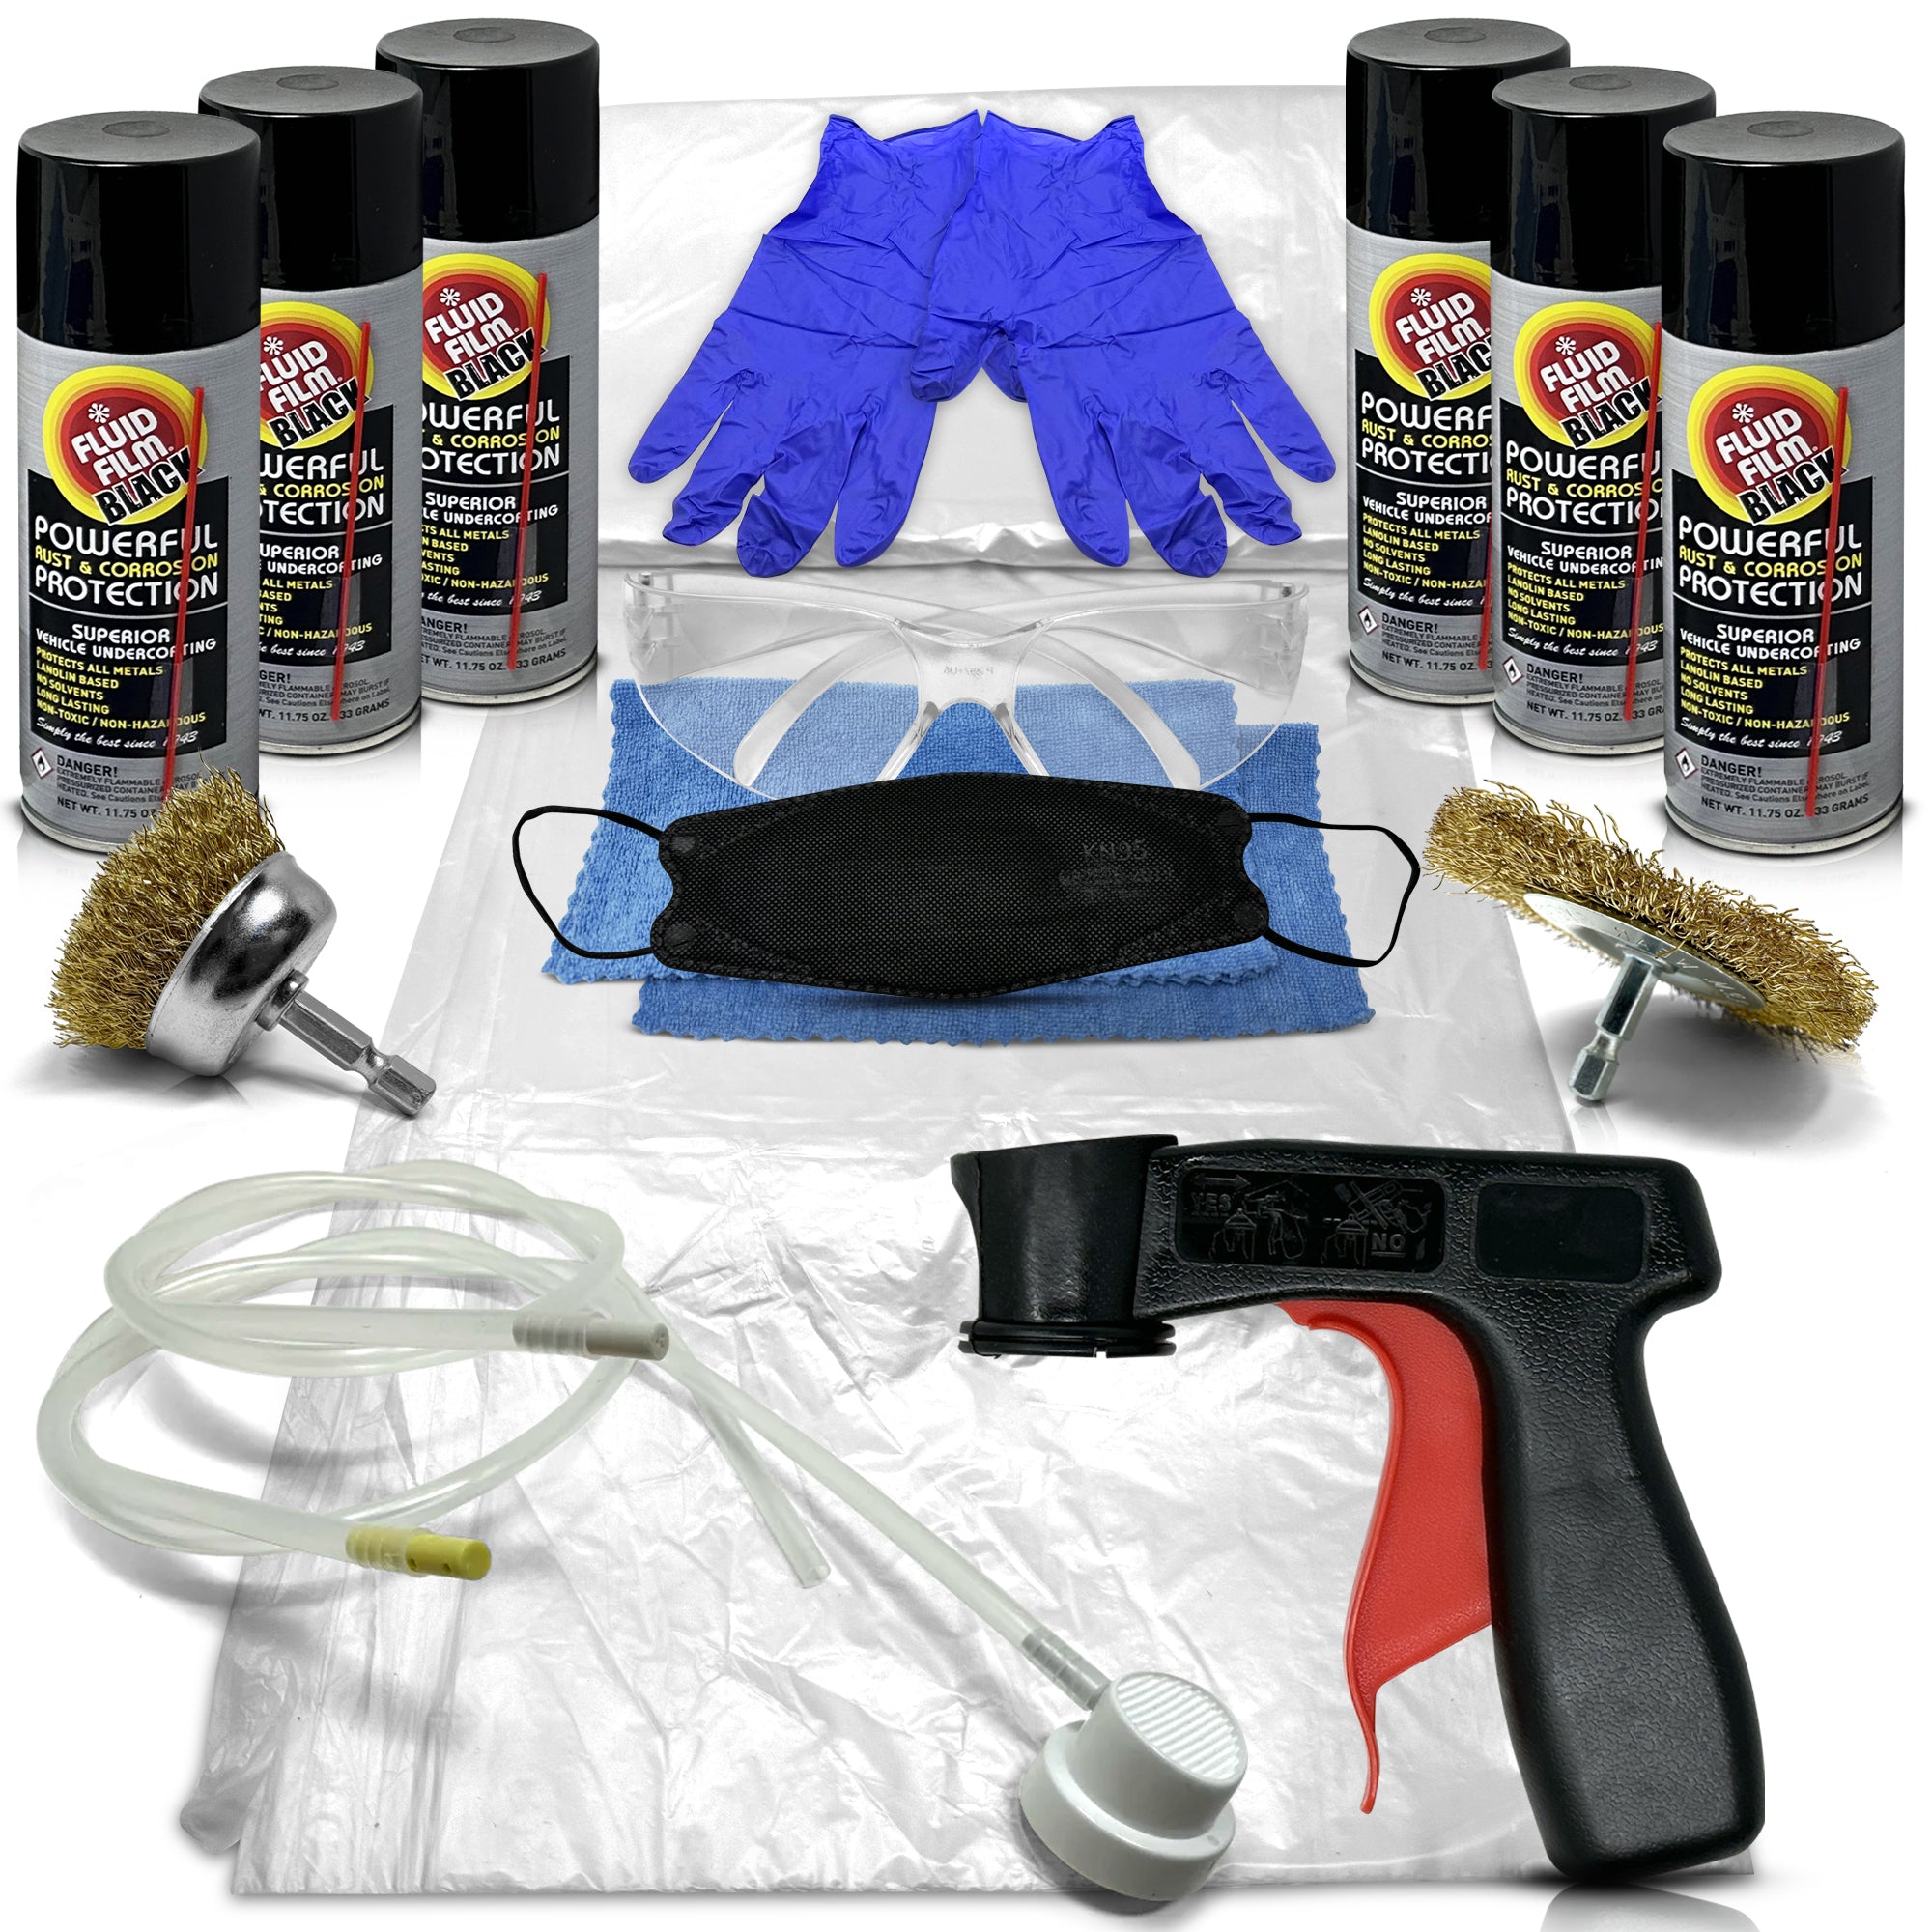 Fluid Film Black fluid film Converter Spray with Rust Remover Prevention and Inhibitor Properties for Metal Protection and Fluid Film Undercoating Kit Includes Complete DIY Car Rust Stopper kit Bundle